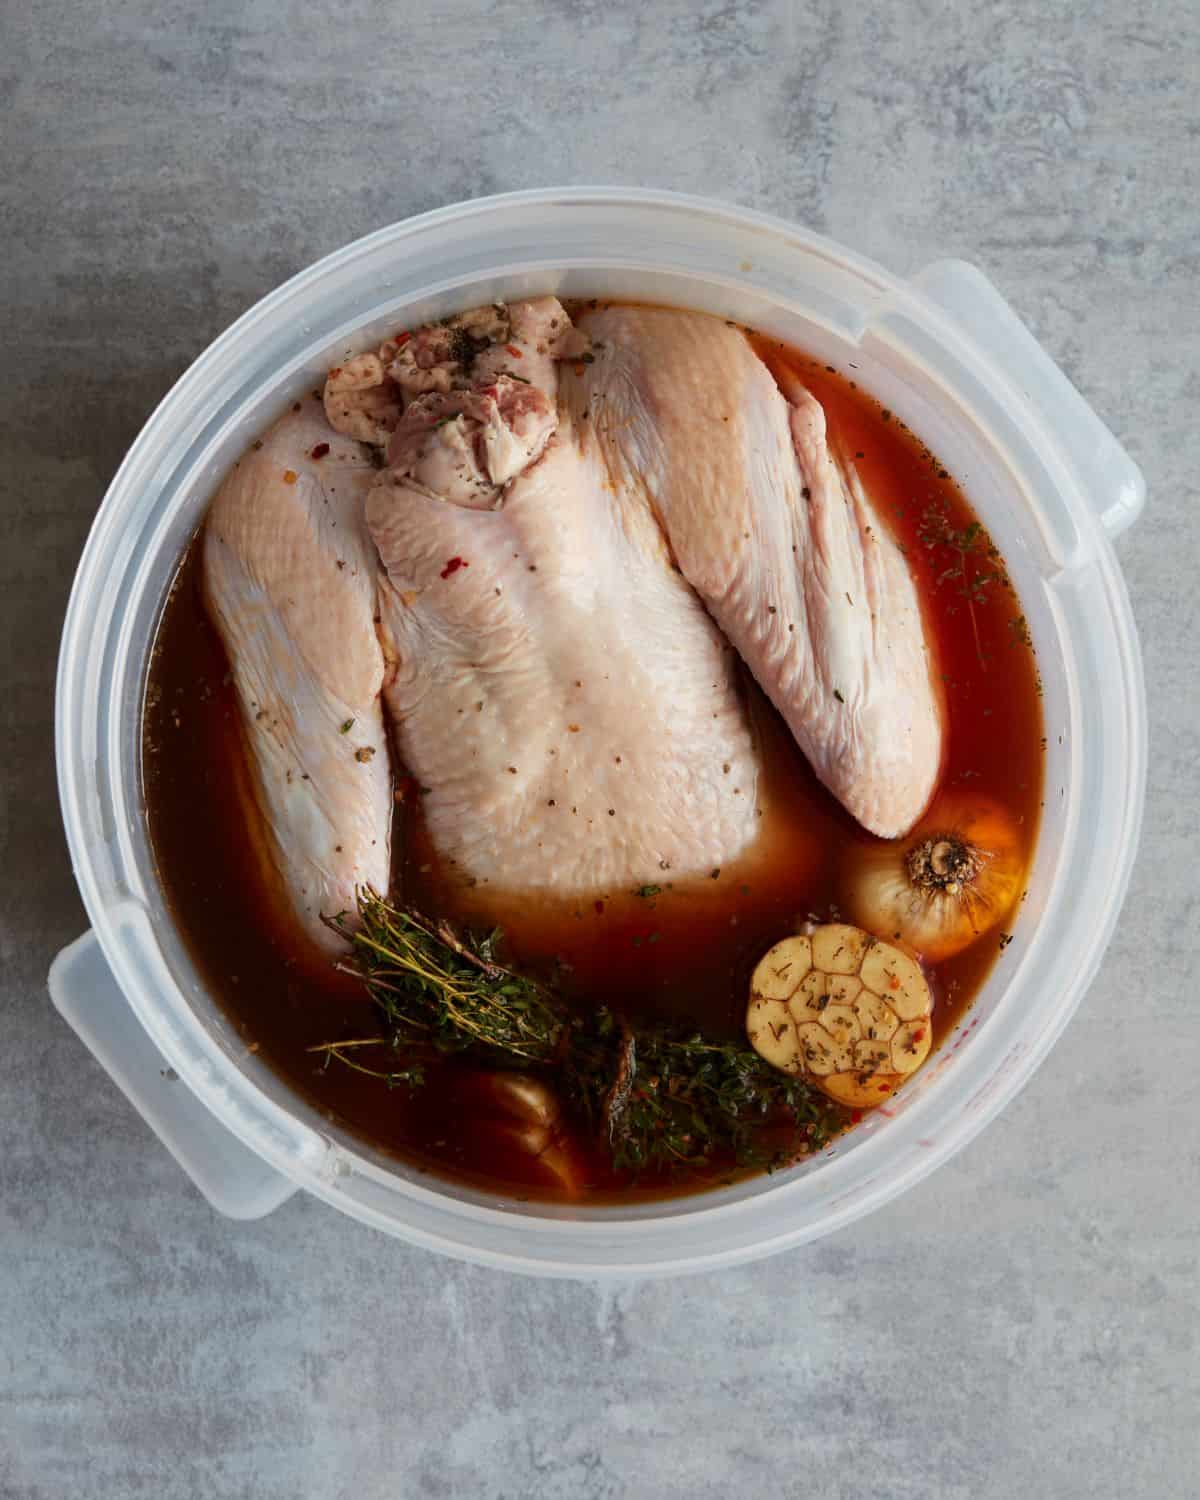 A large plastic container with turkey soaked in a wet brine of water and spices.